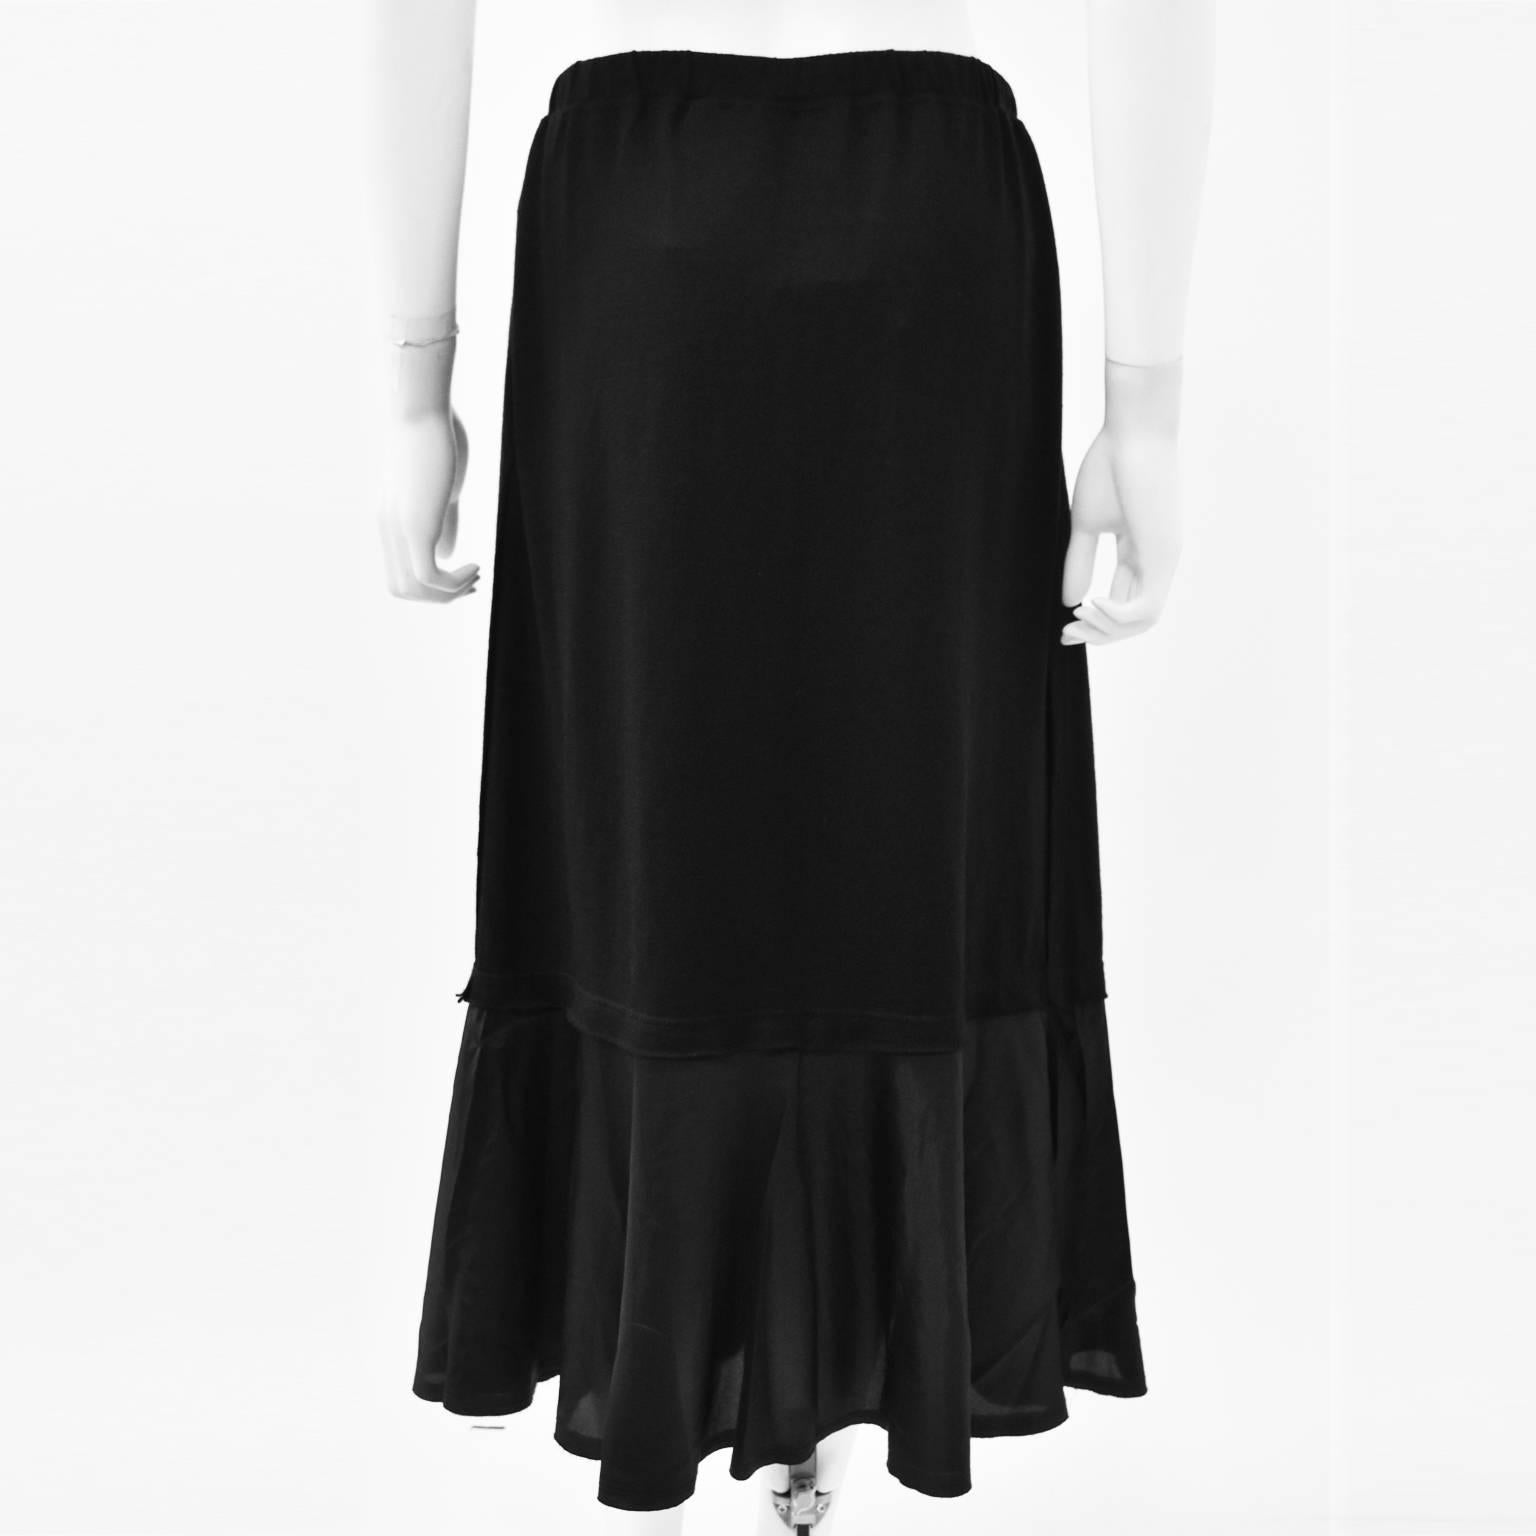  Comme des Garcons Black Wool and Rayon Contrast Hem Skirt  For Sale 1